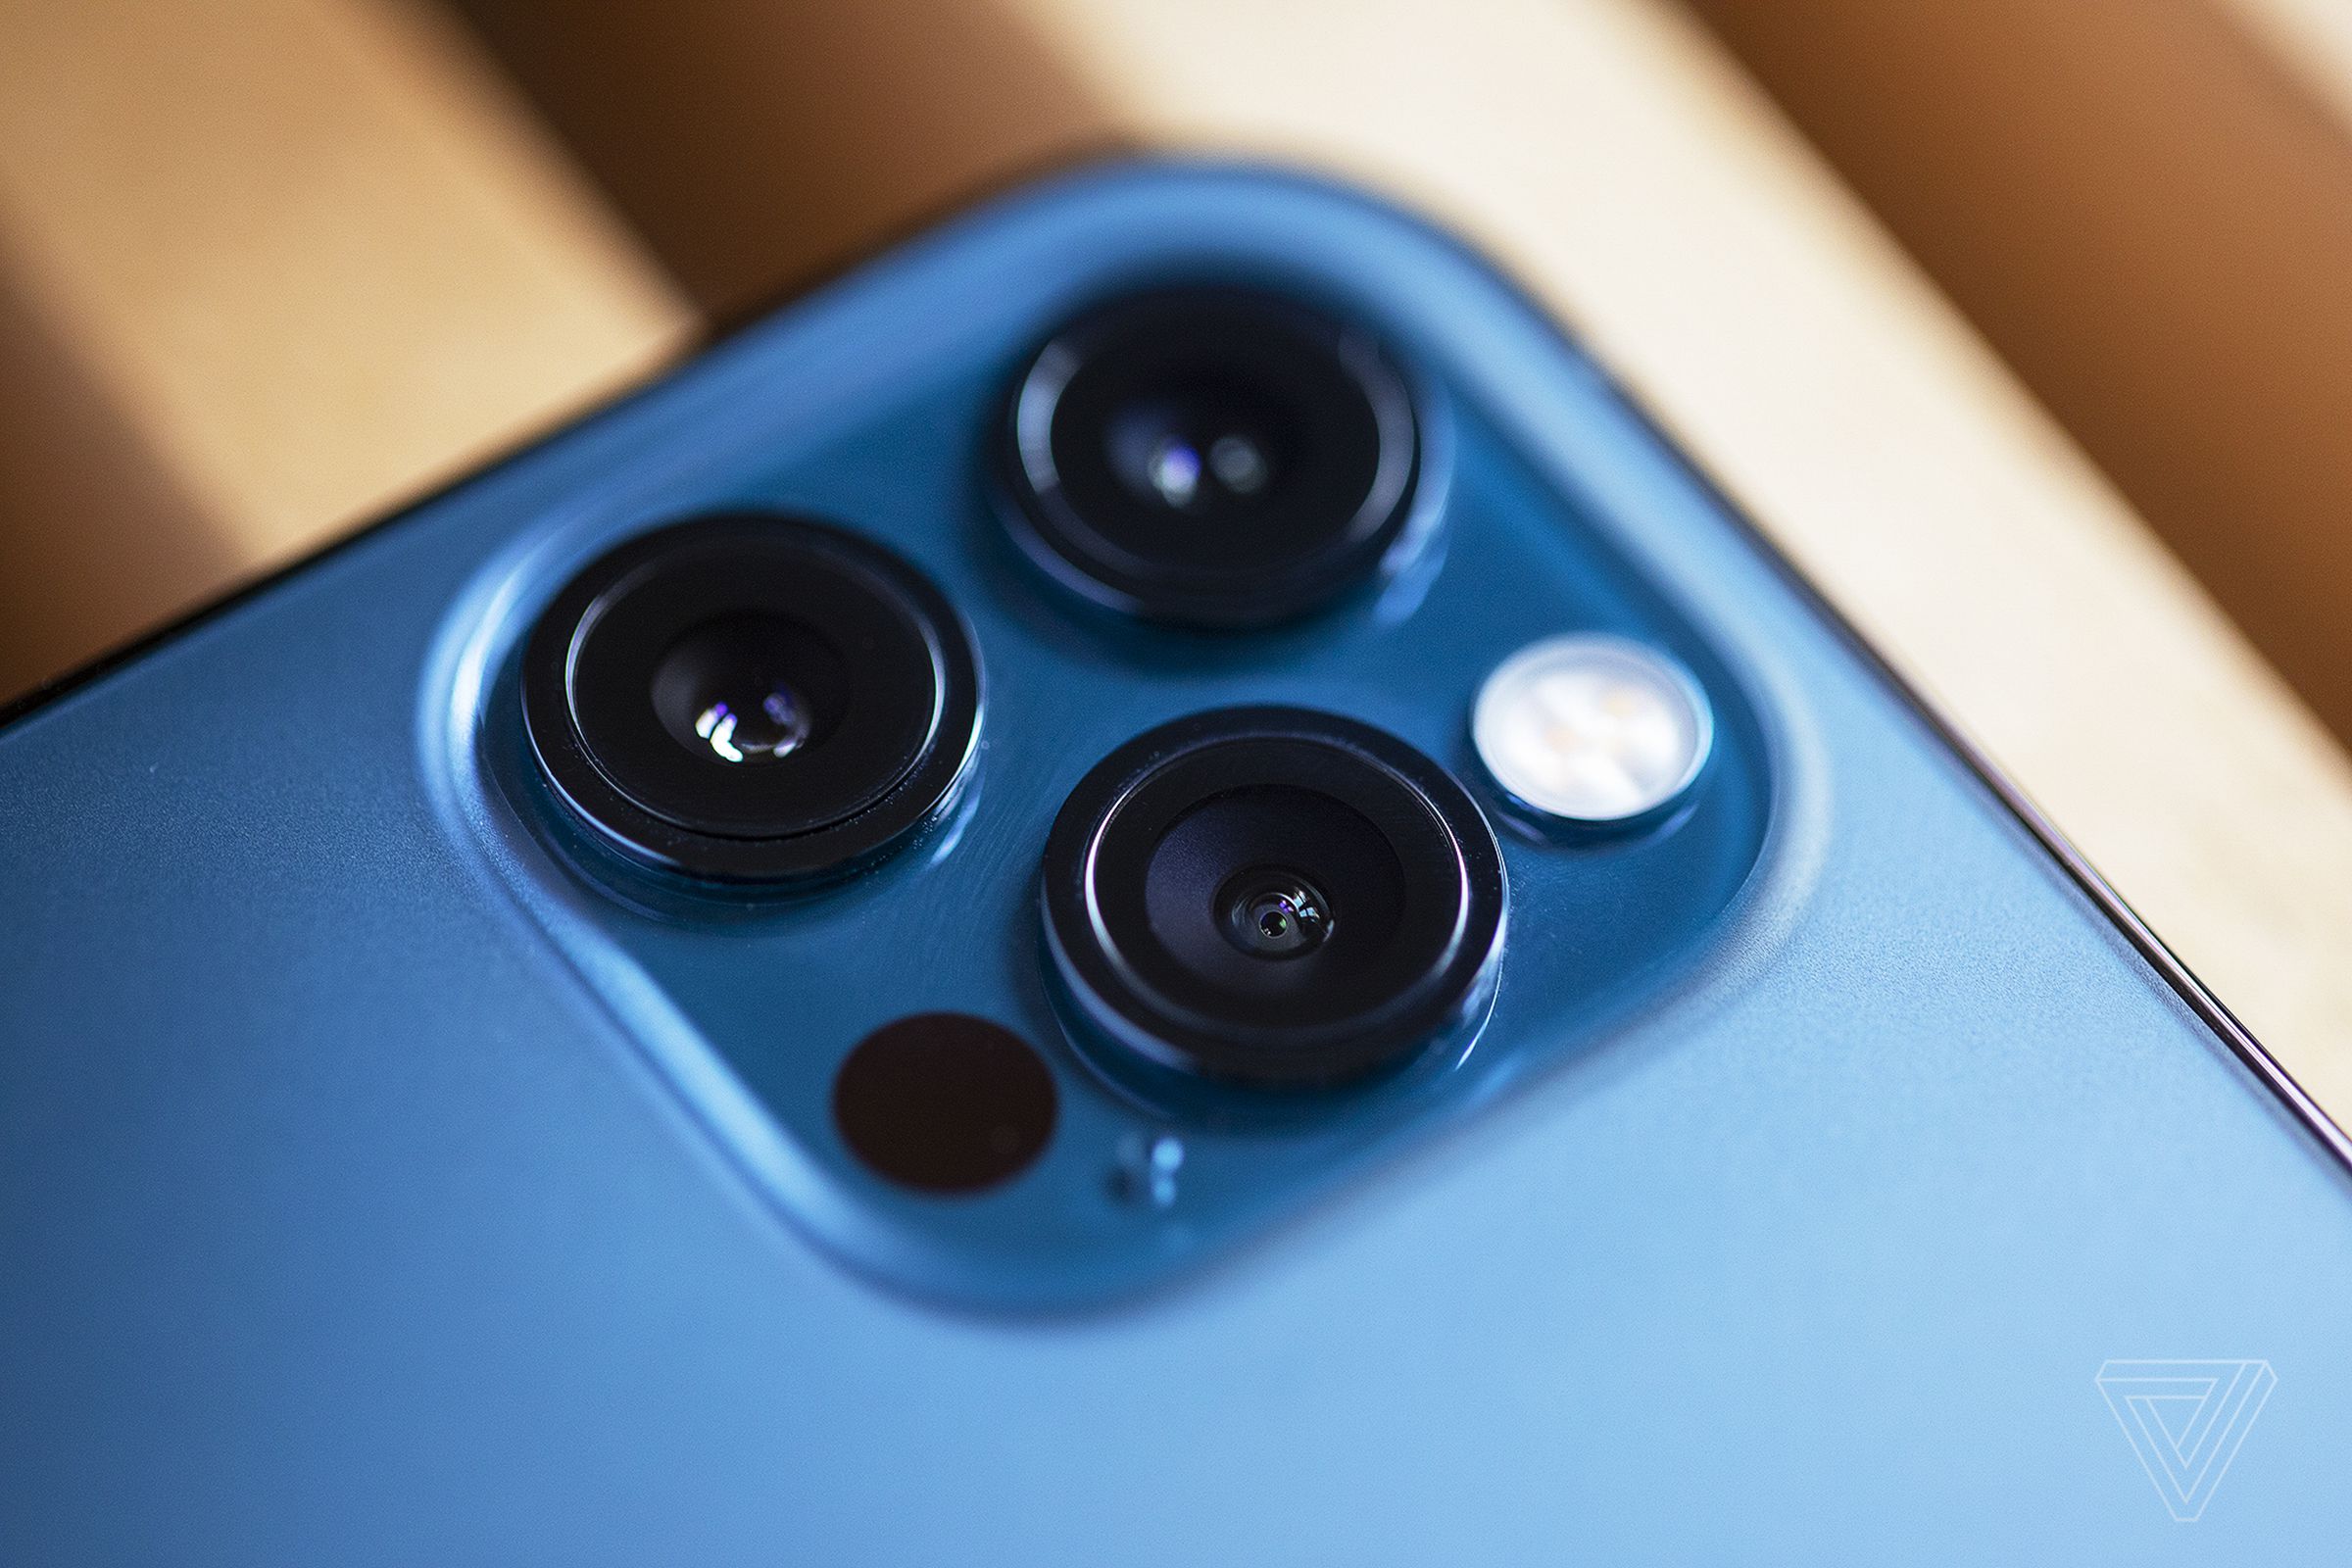 The iPhone 12 Pro has three cameras — normal, ultrawide, and telephoto — plus a LIDAR sensor on the back.